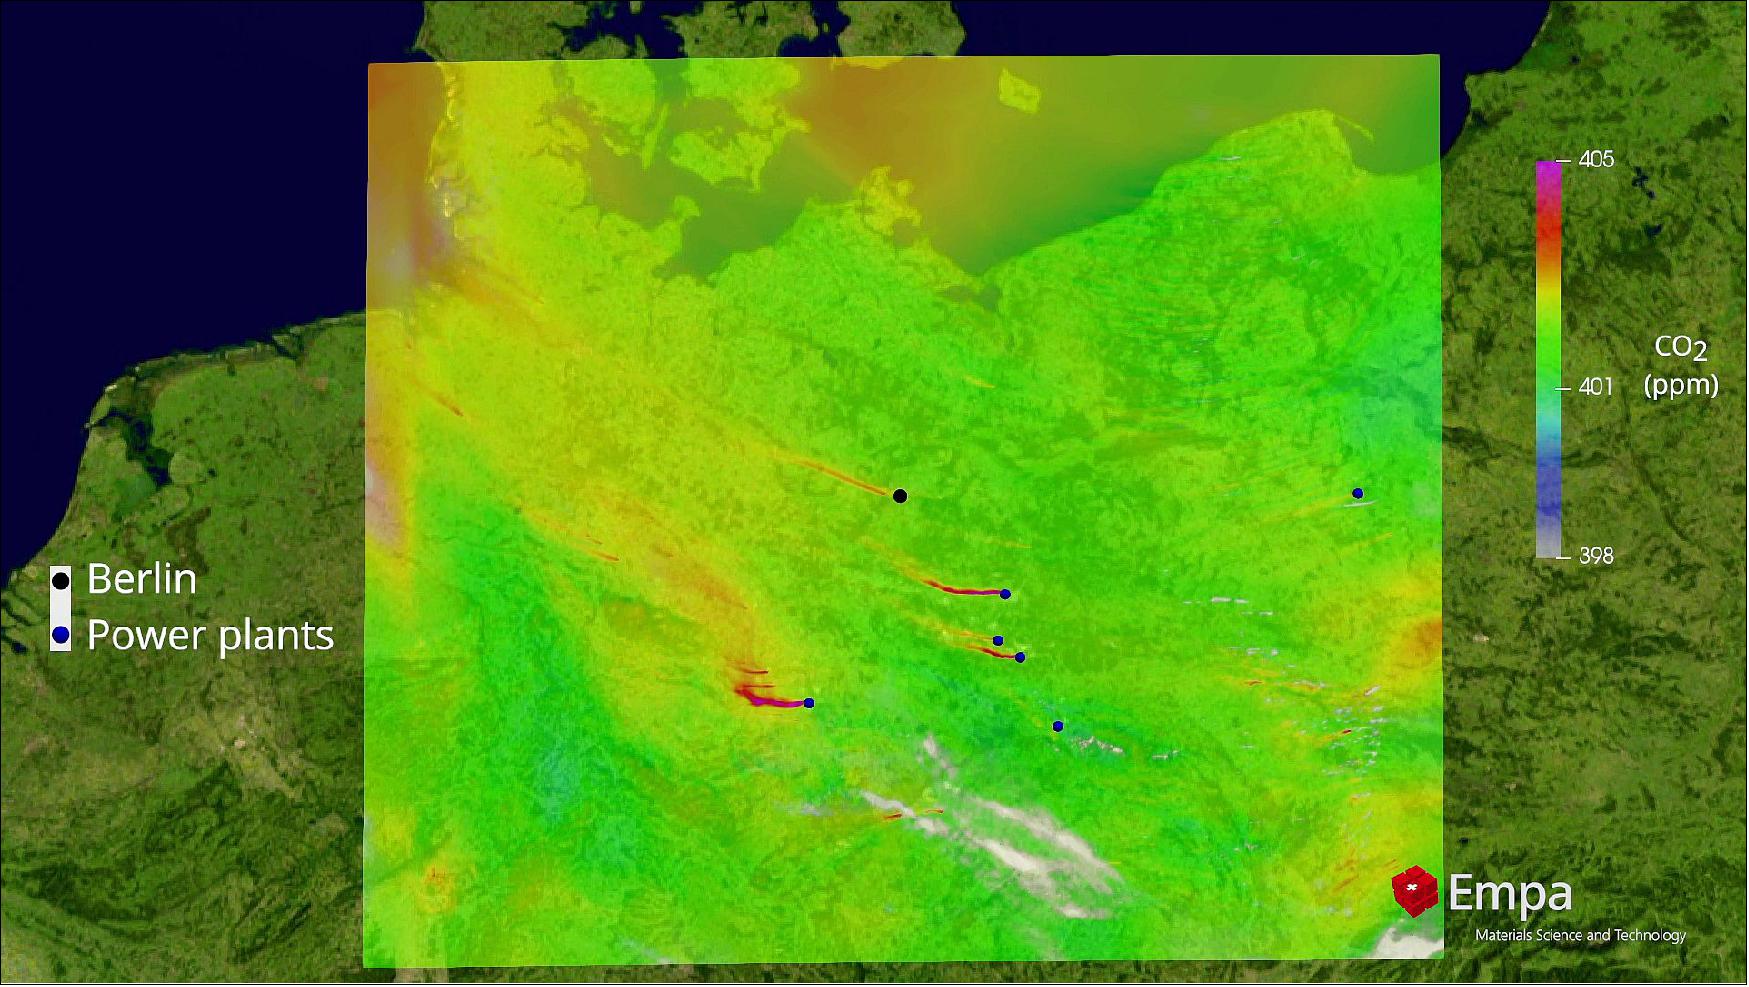 Figure 2: High-resolution simulation of total column carbon dioxide plumes from Berlin and nearby power plants on 2 July 2015. The data were generated by Empa, as part of the ESA-funded Smartcarb study (image credit: Empa, Swiss Federal Laboratories for Materials Science and Technology) 2)